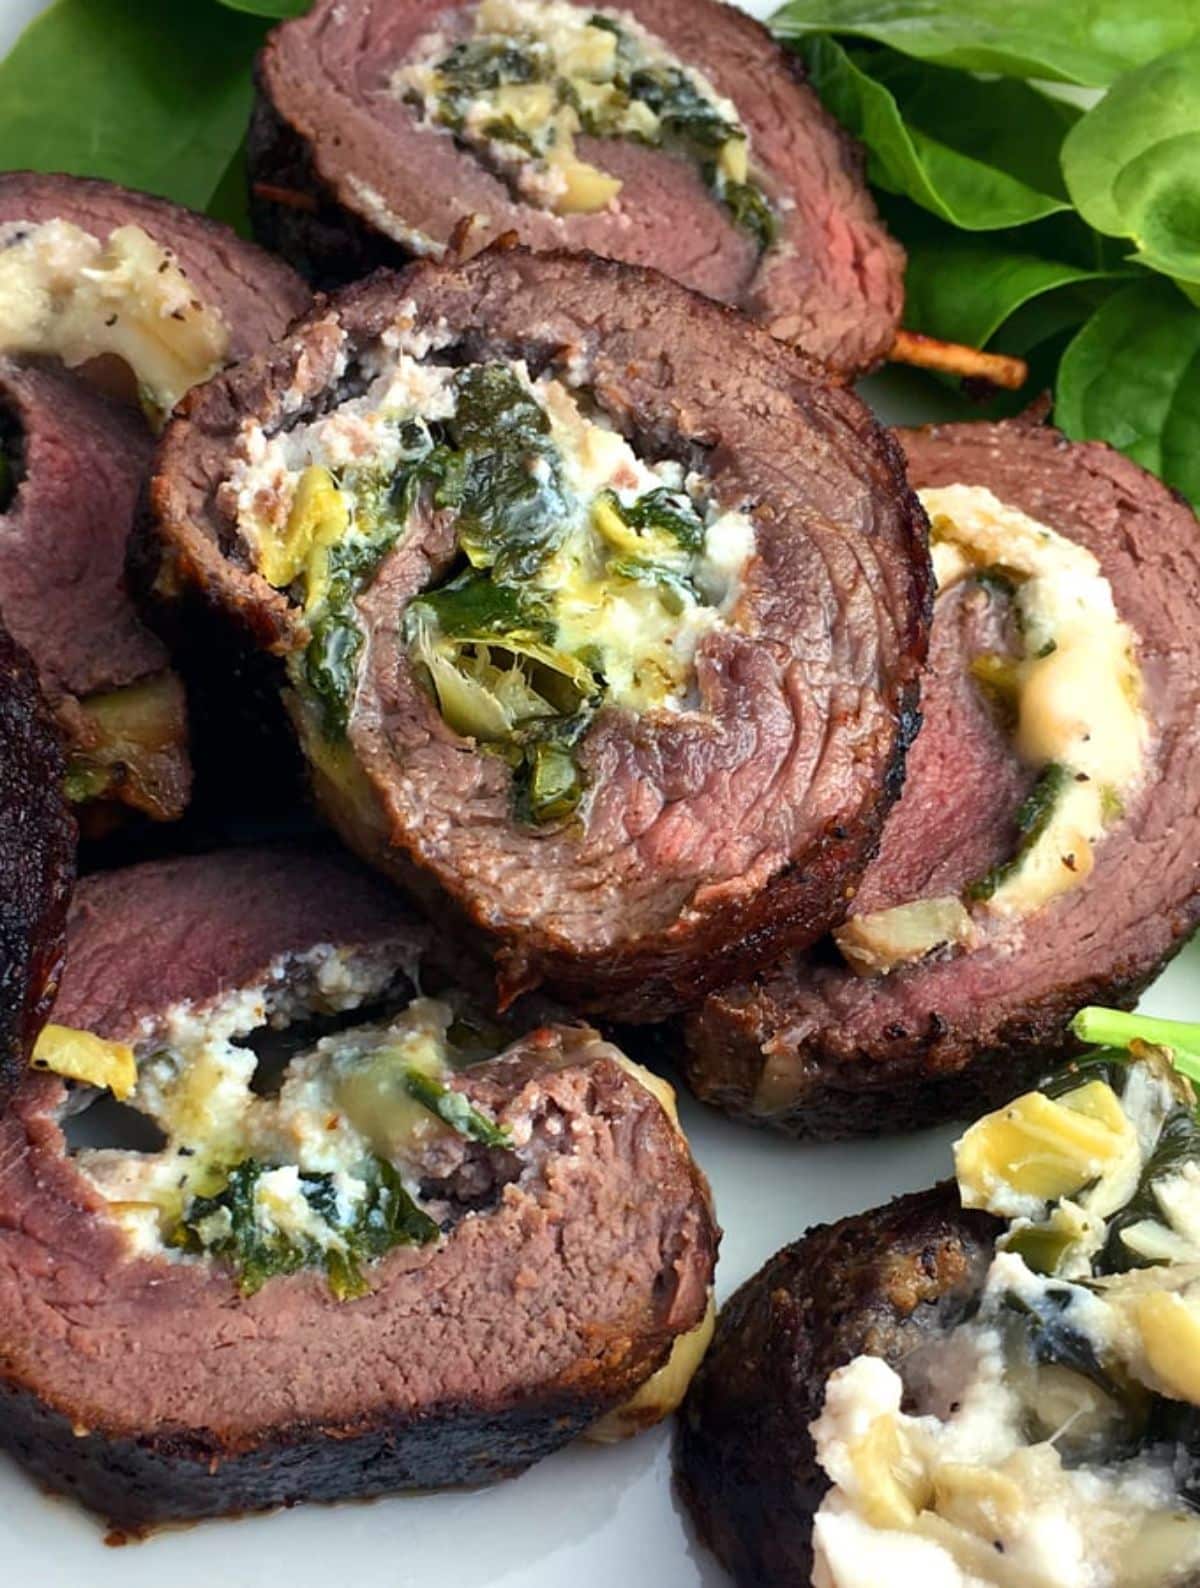 Scrumptious elk steak roulade with artichoke hearts on a white tray.